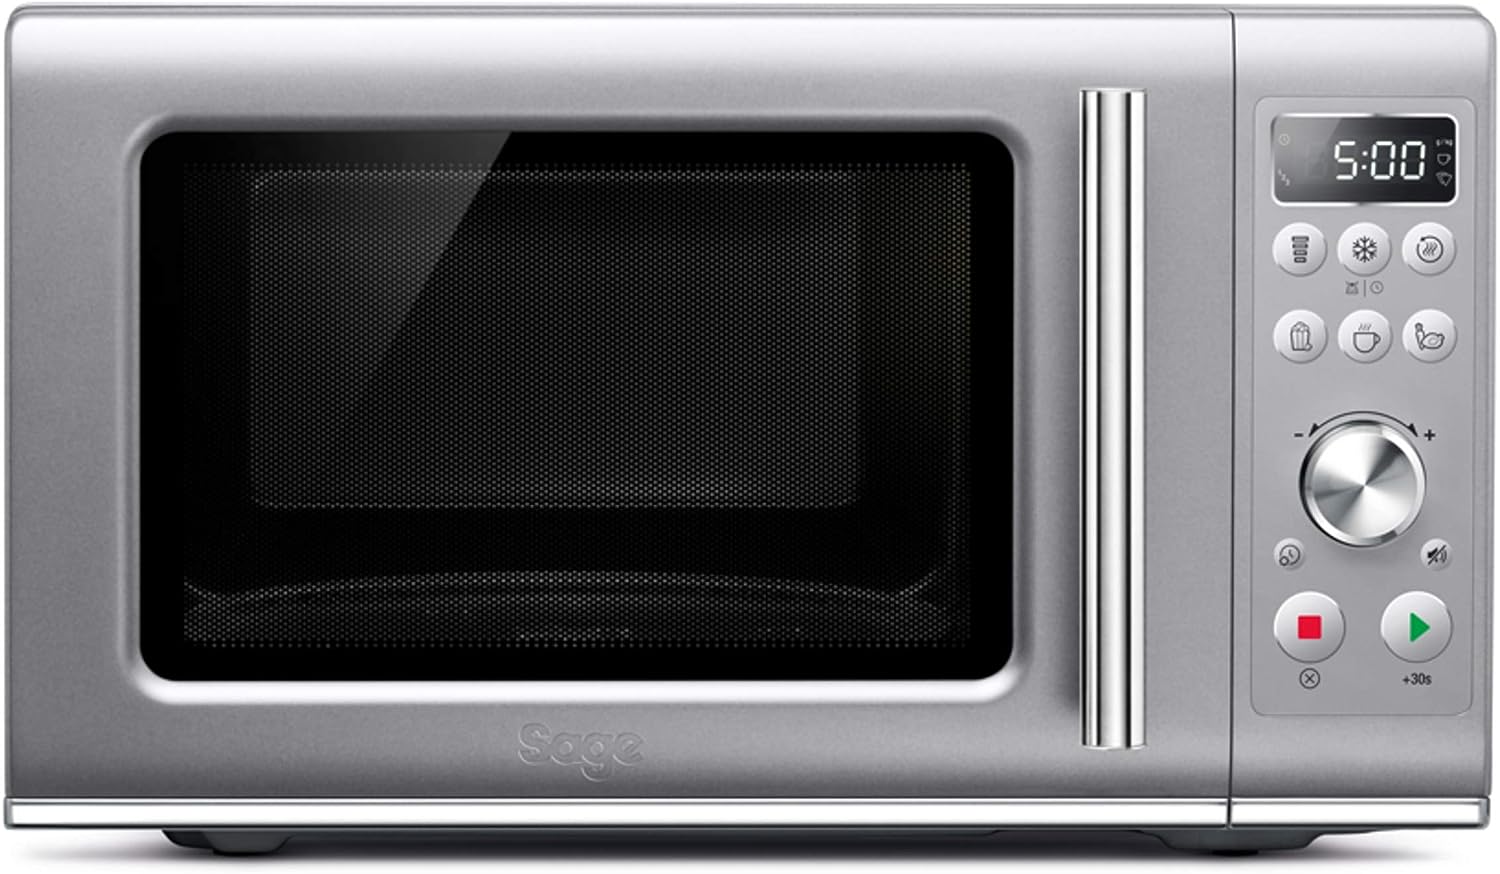 Sage Appliances SMO650 the Compact Wave Microwave Oven 800 Watt Silver